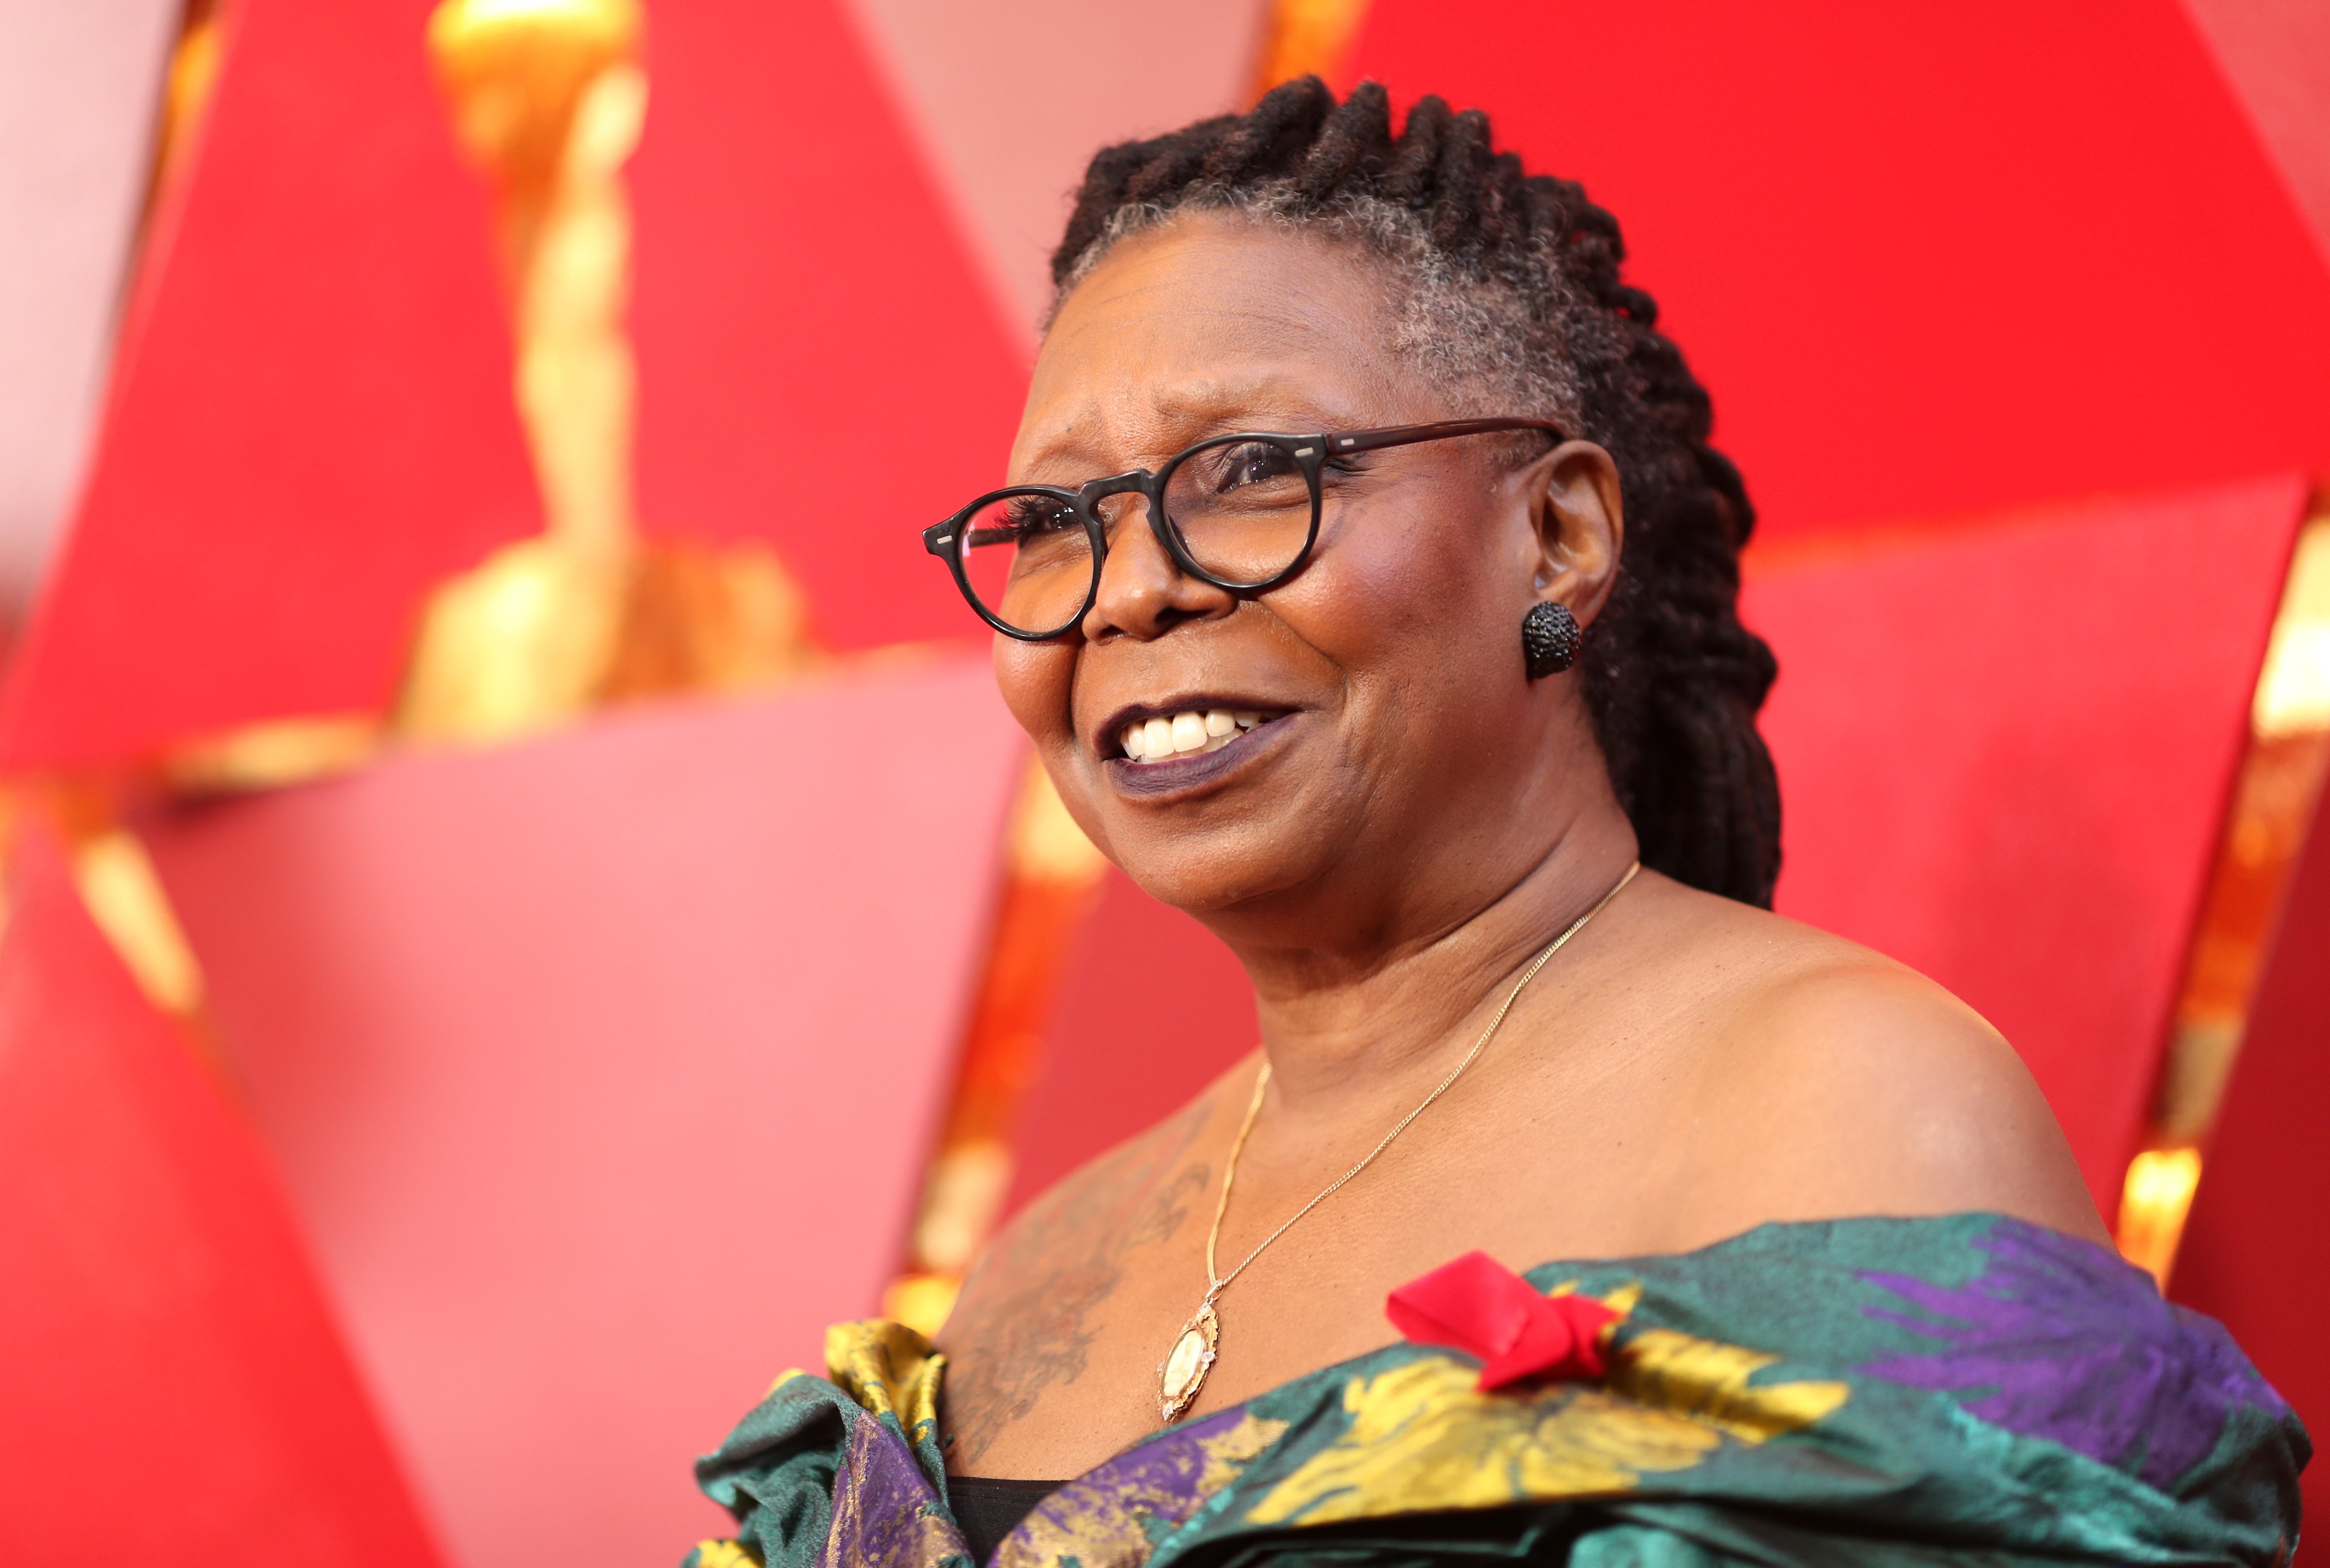 Whoopi Goldberg at the 90th Annual Academy Awards at Hollywood & Highland Center on March 4, 2018 in Hollywood, California | Photo: Getty Images